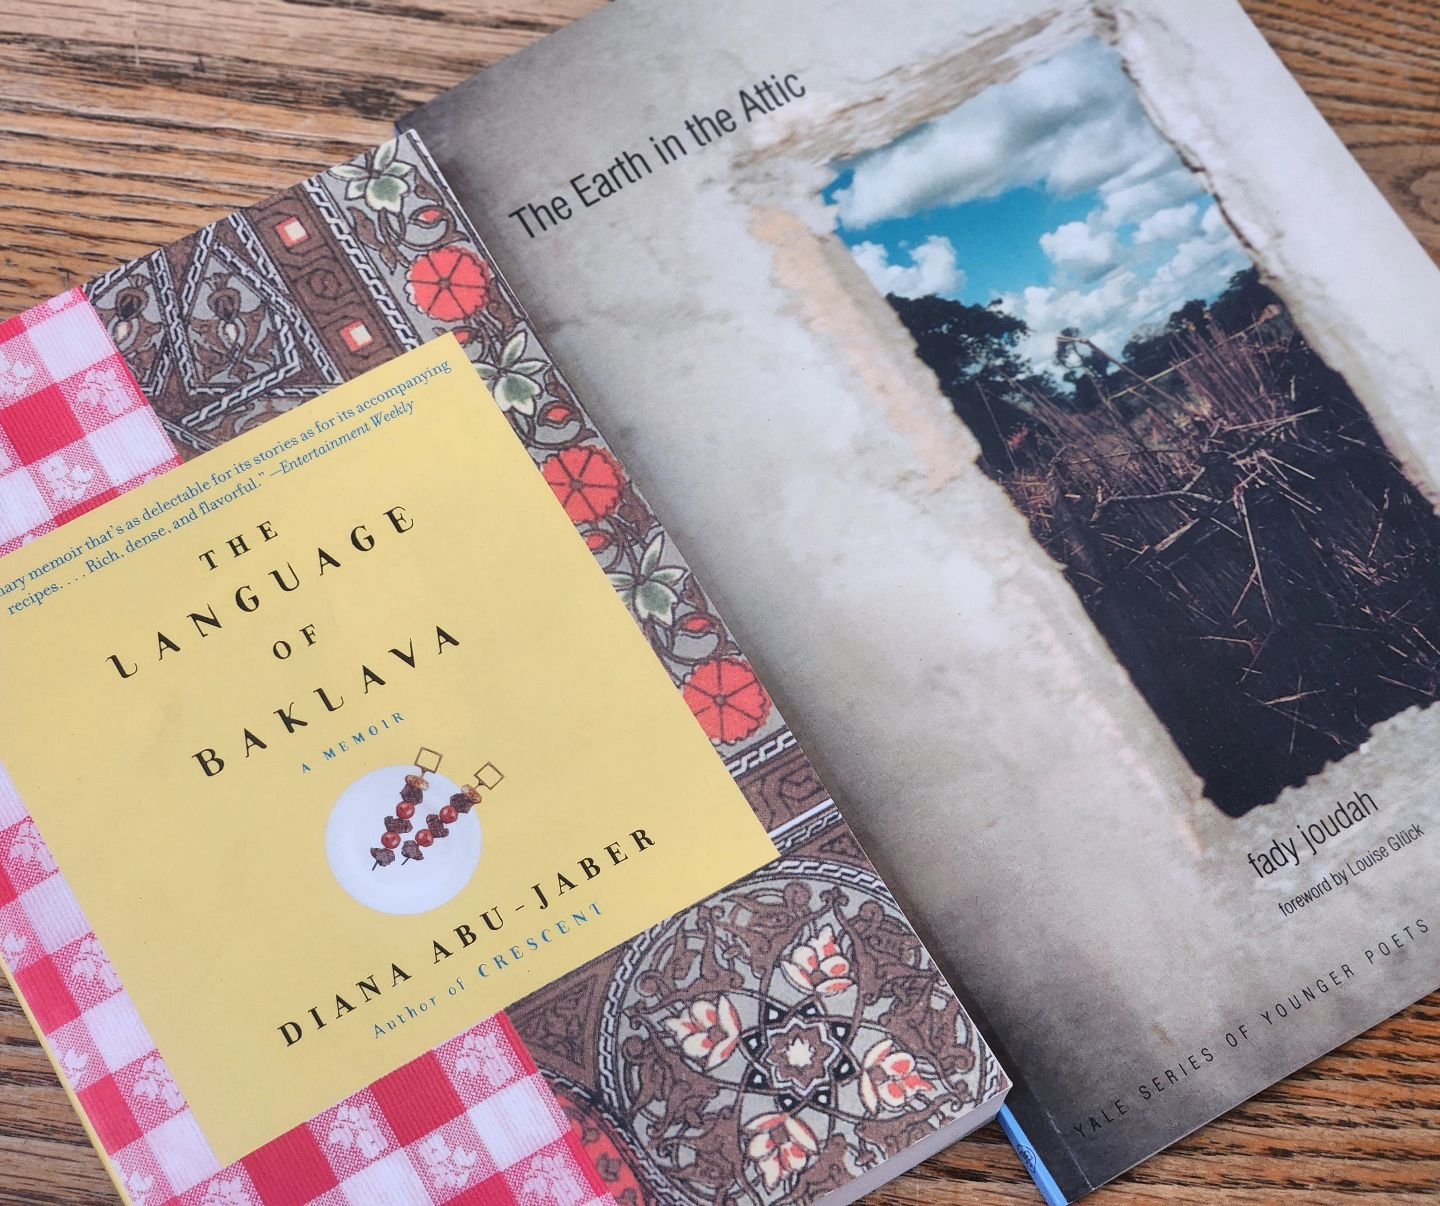 What we're reading this month 'food for thought' @farleysbookshop cider book club. #thelanguageofbaklava #theearthintheattic

#reading #bookclub #wineclub #cidery #resilience #recipeoftheday #foodie #recipe #foodforthought #palestine